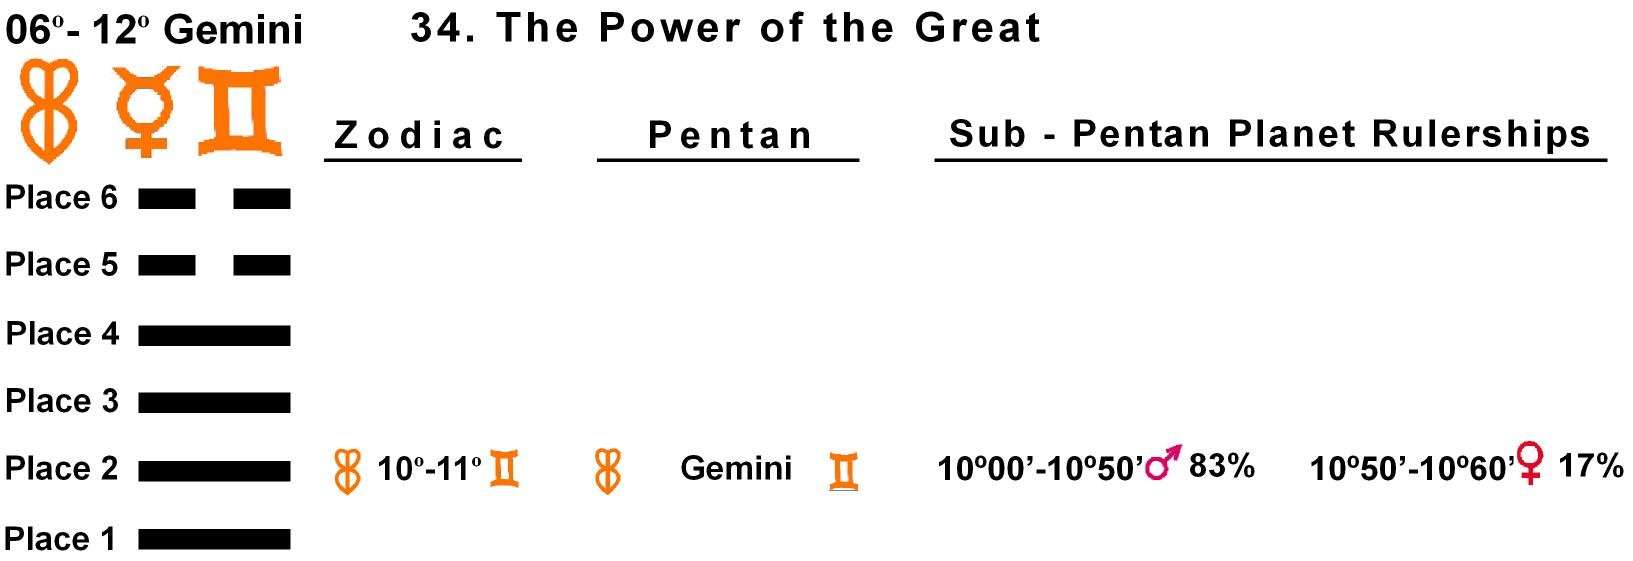 Pent-lines-03GE 10-11 Hx-34 Power Of The Great